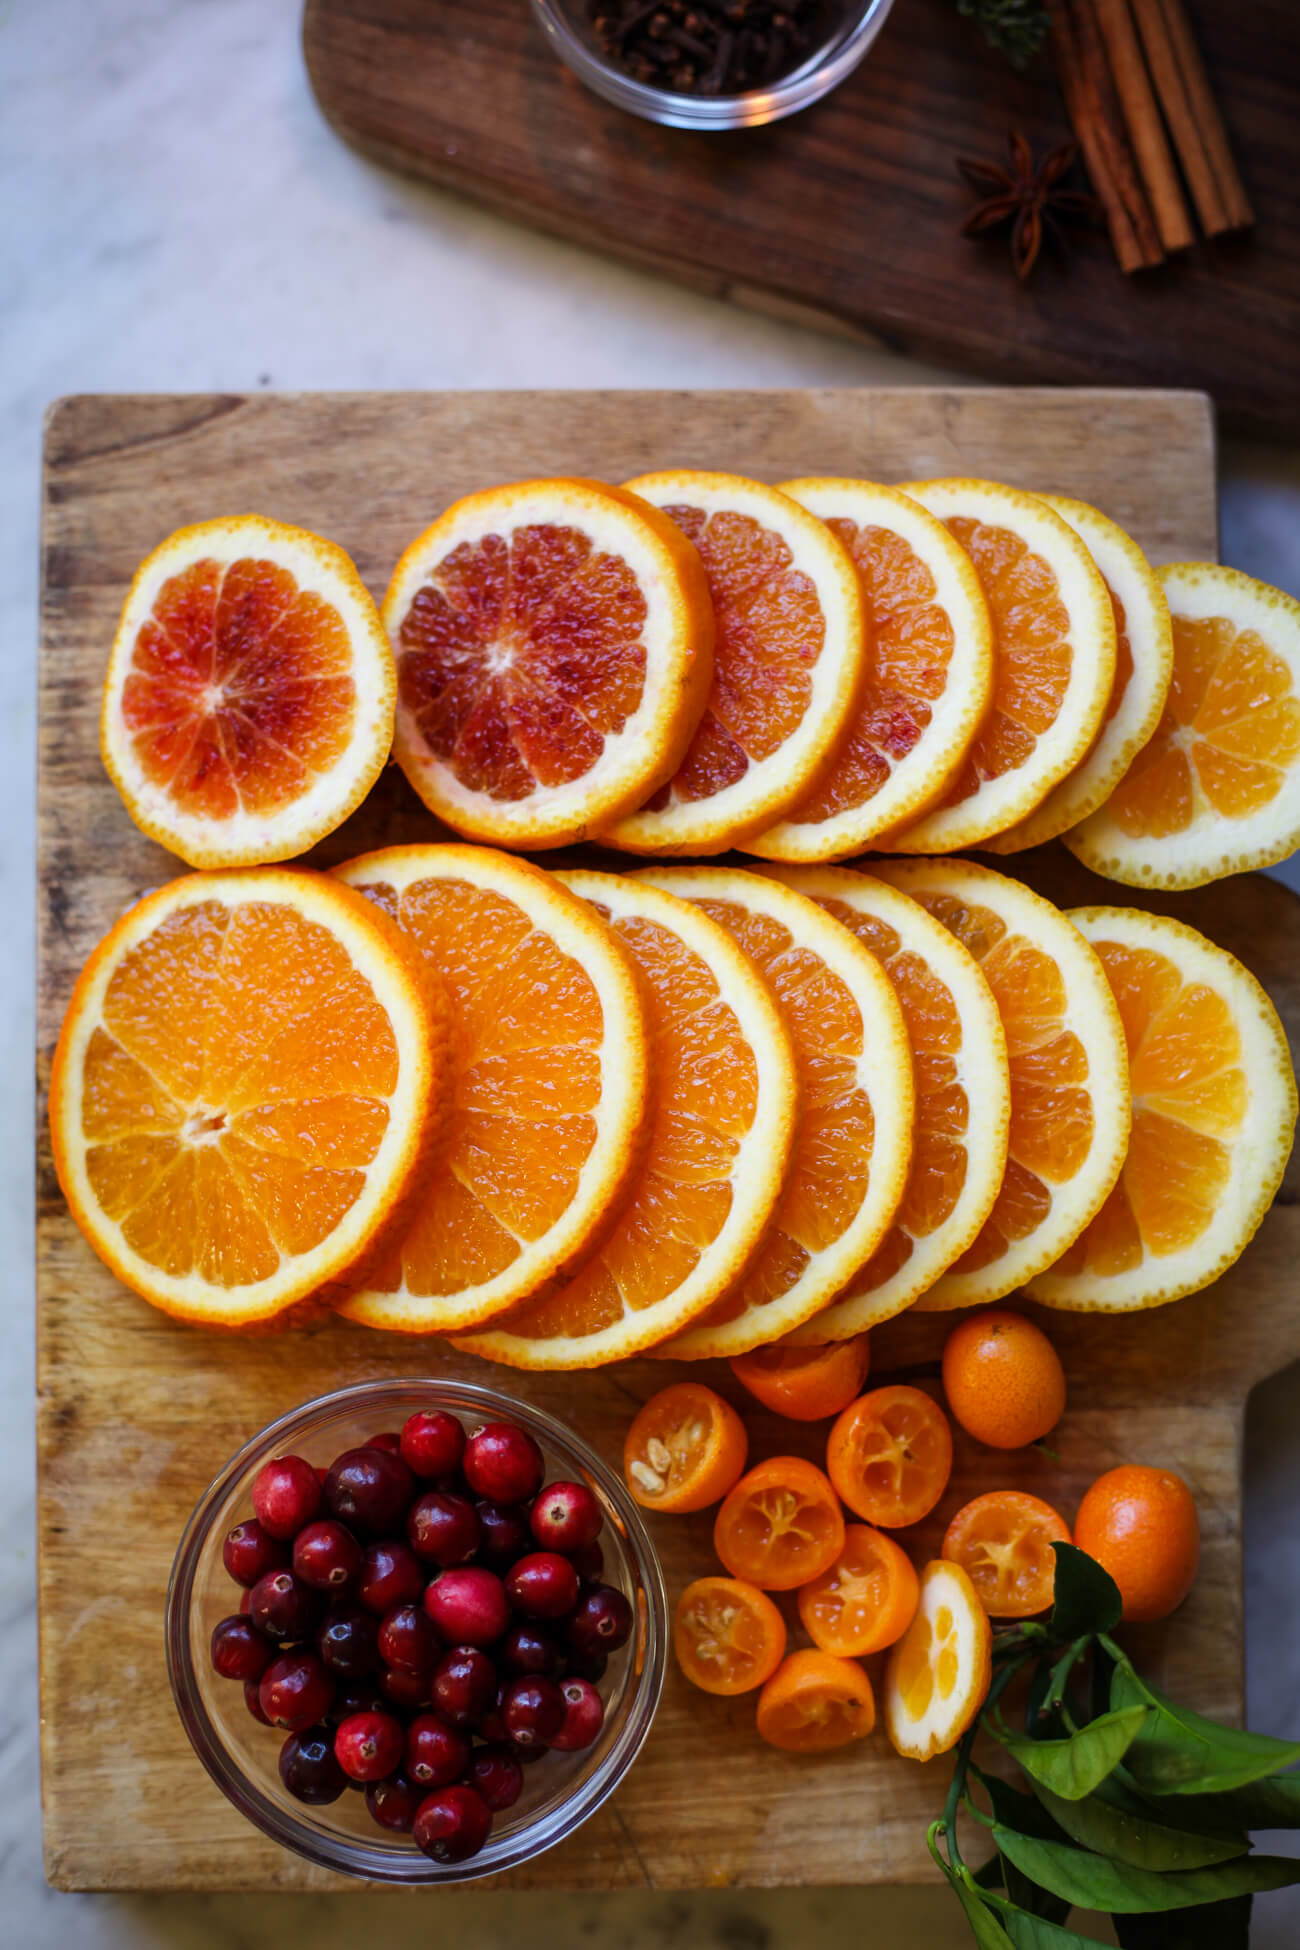 Sliced oranges and kumquats on a cutting board with a bowl of cranberries. 